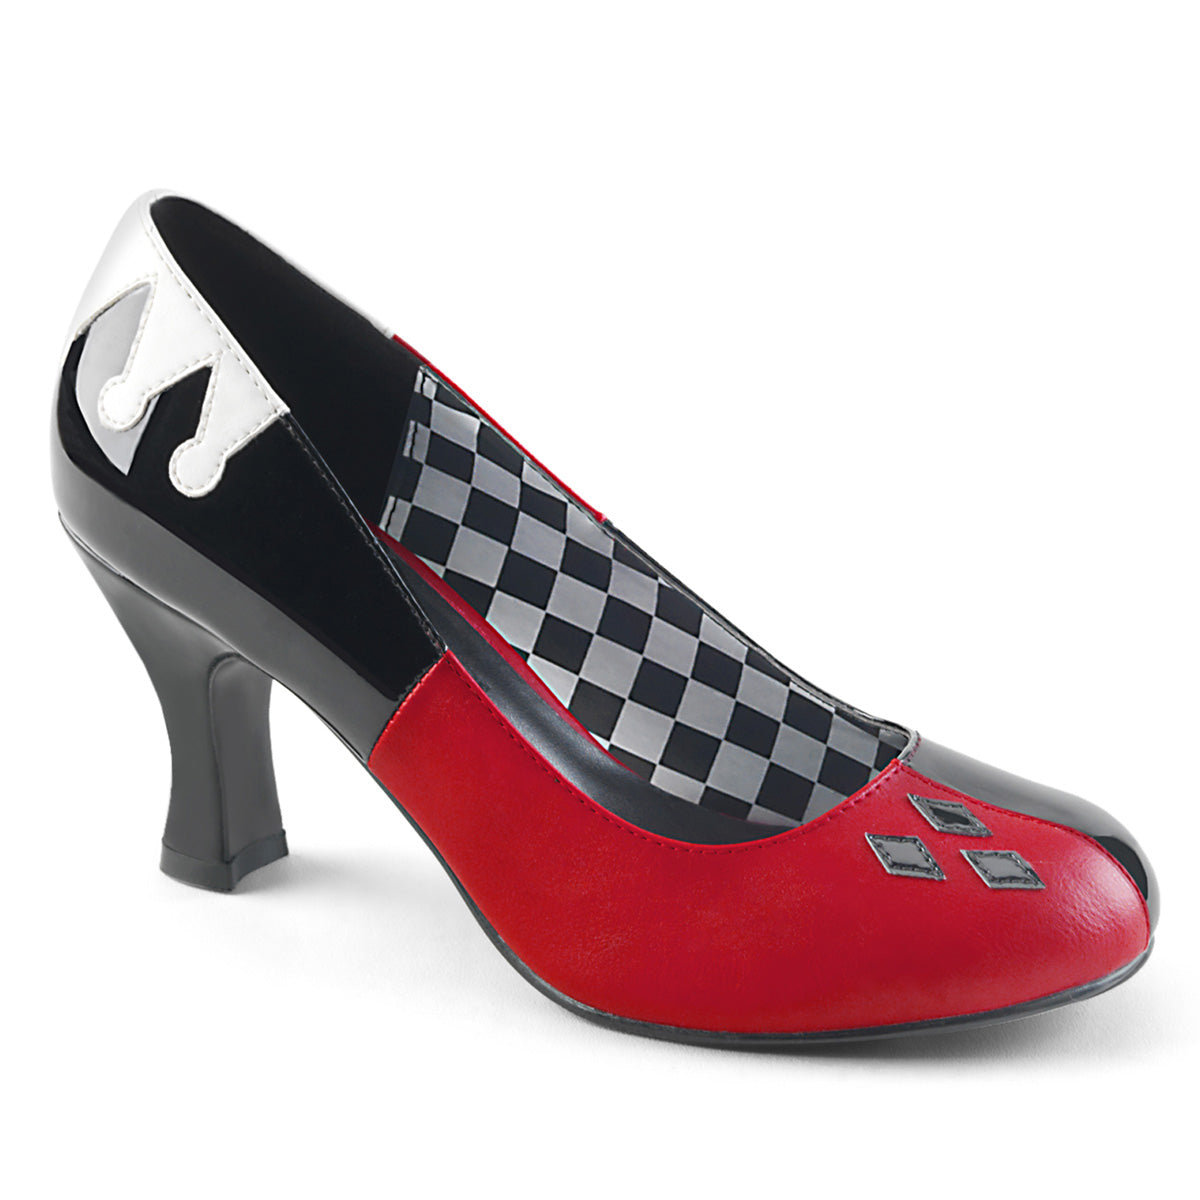 HARLEY-42 3" Heel Black and Red Women's Costume Shoes Funtasma Costume Shoes